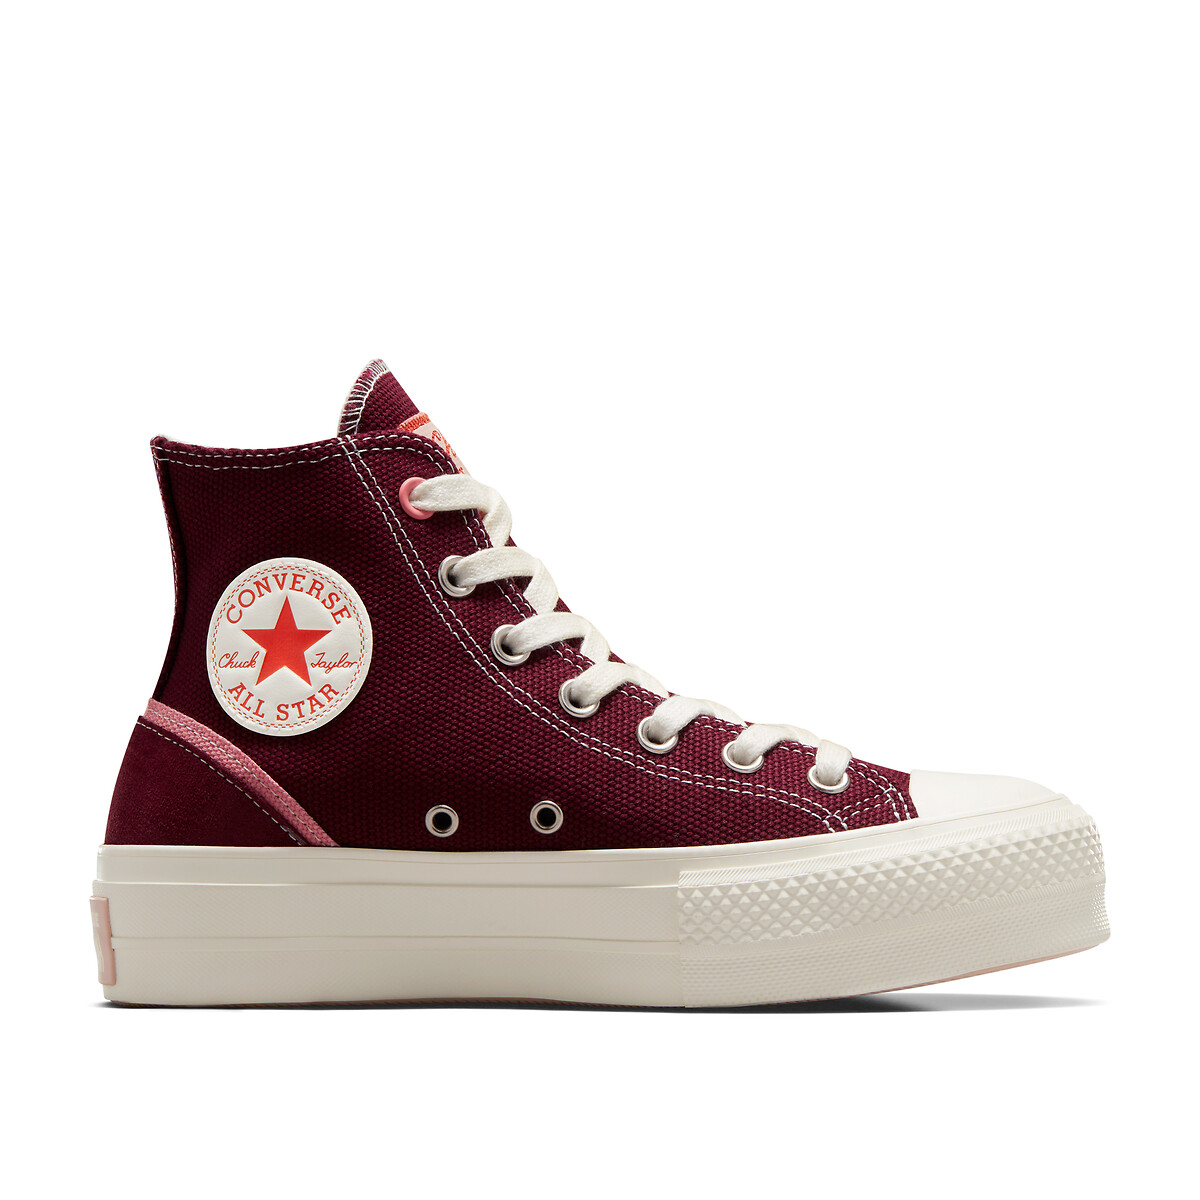 All Star Lift Hi City Utility Canvas High Top Trainers